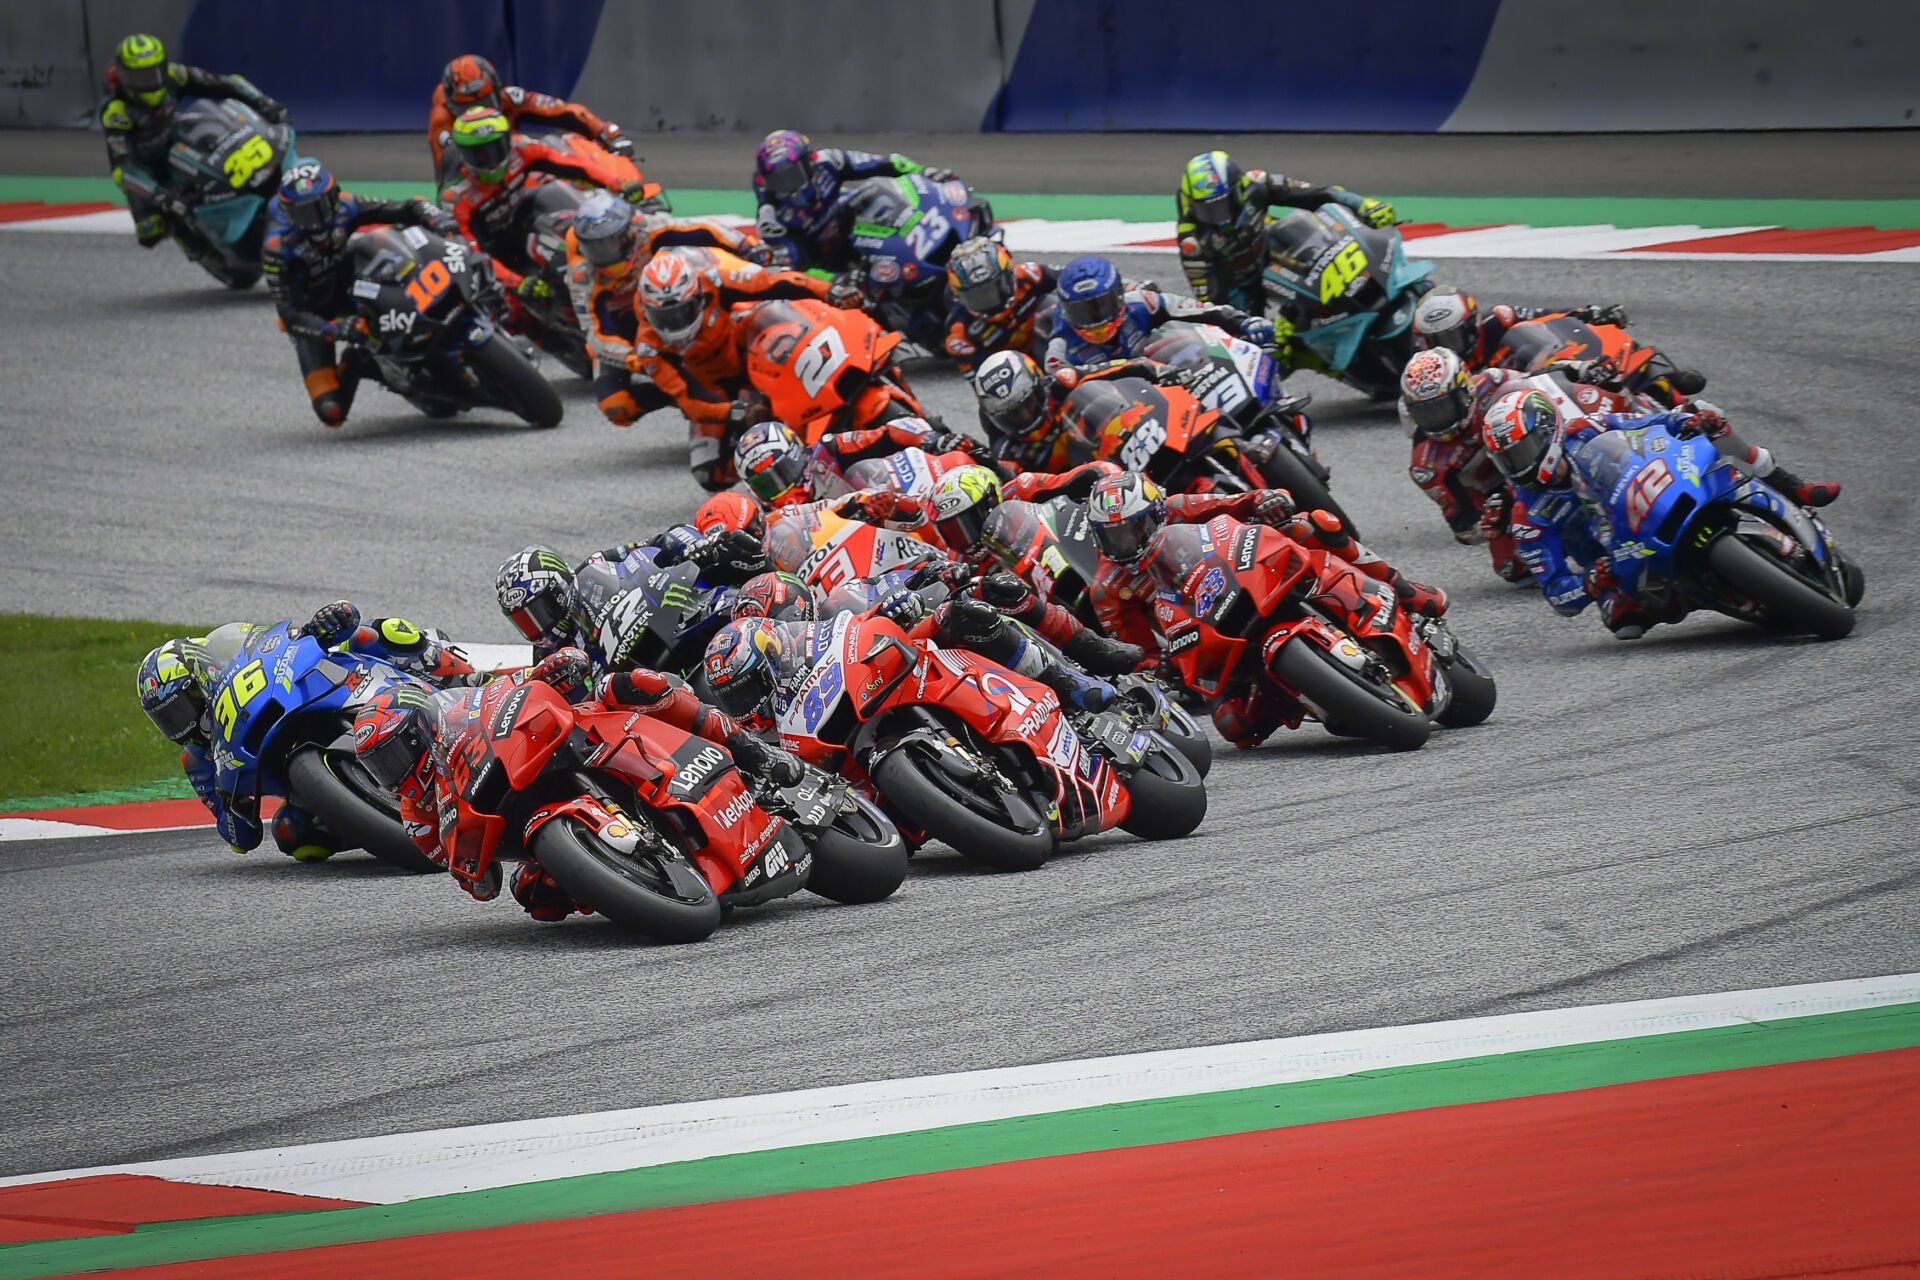 The start of a MotoGP race at Red Bull Ring in 2021. Photo courtesy Dorna.